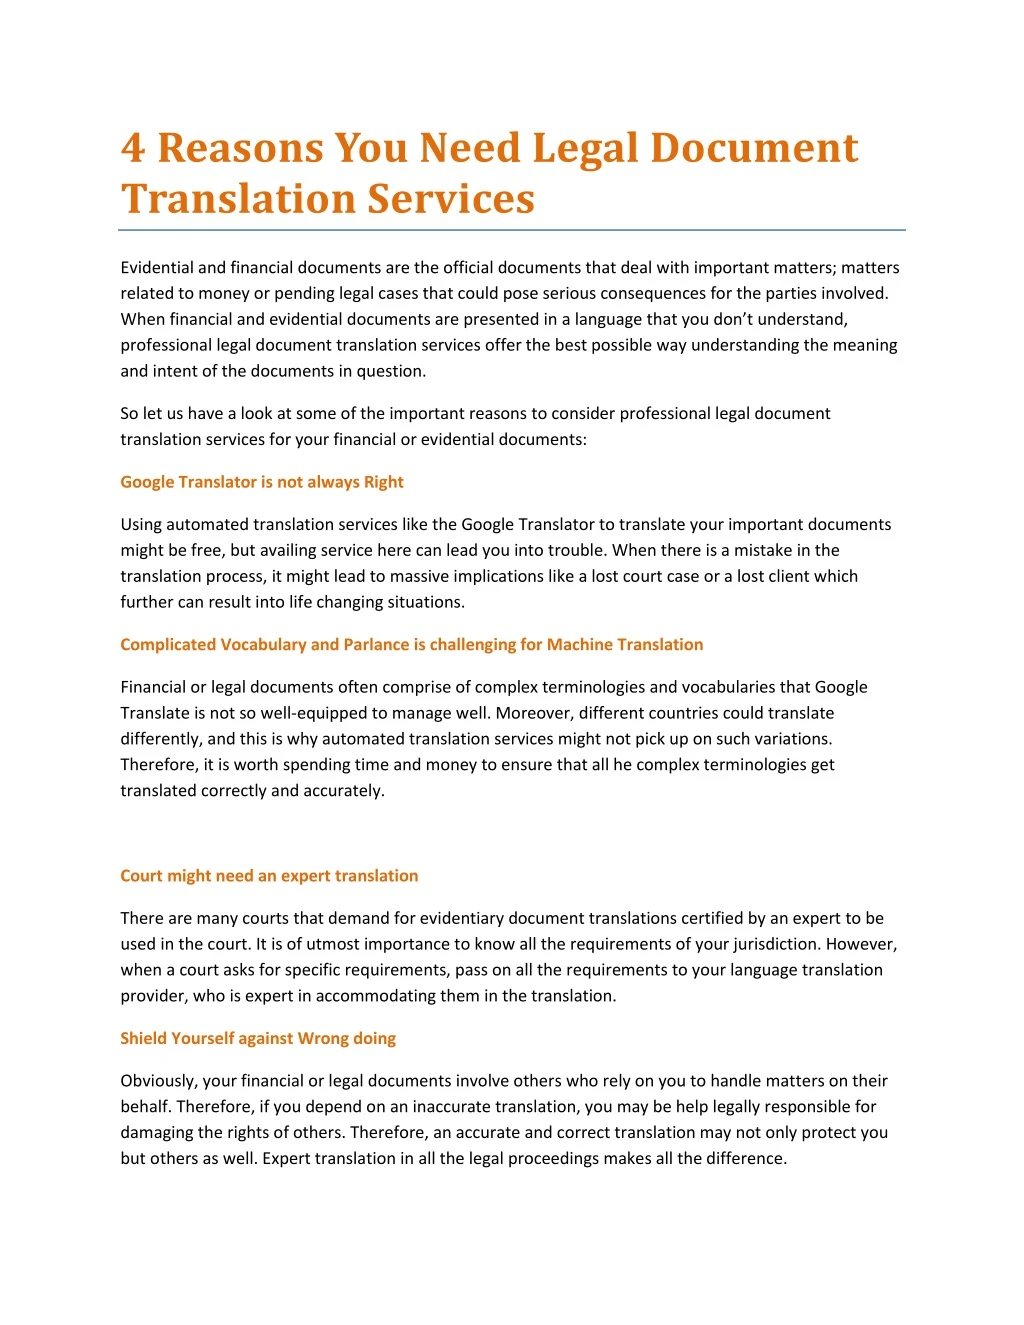 4 reasons you need legal document translation